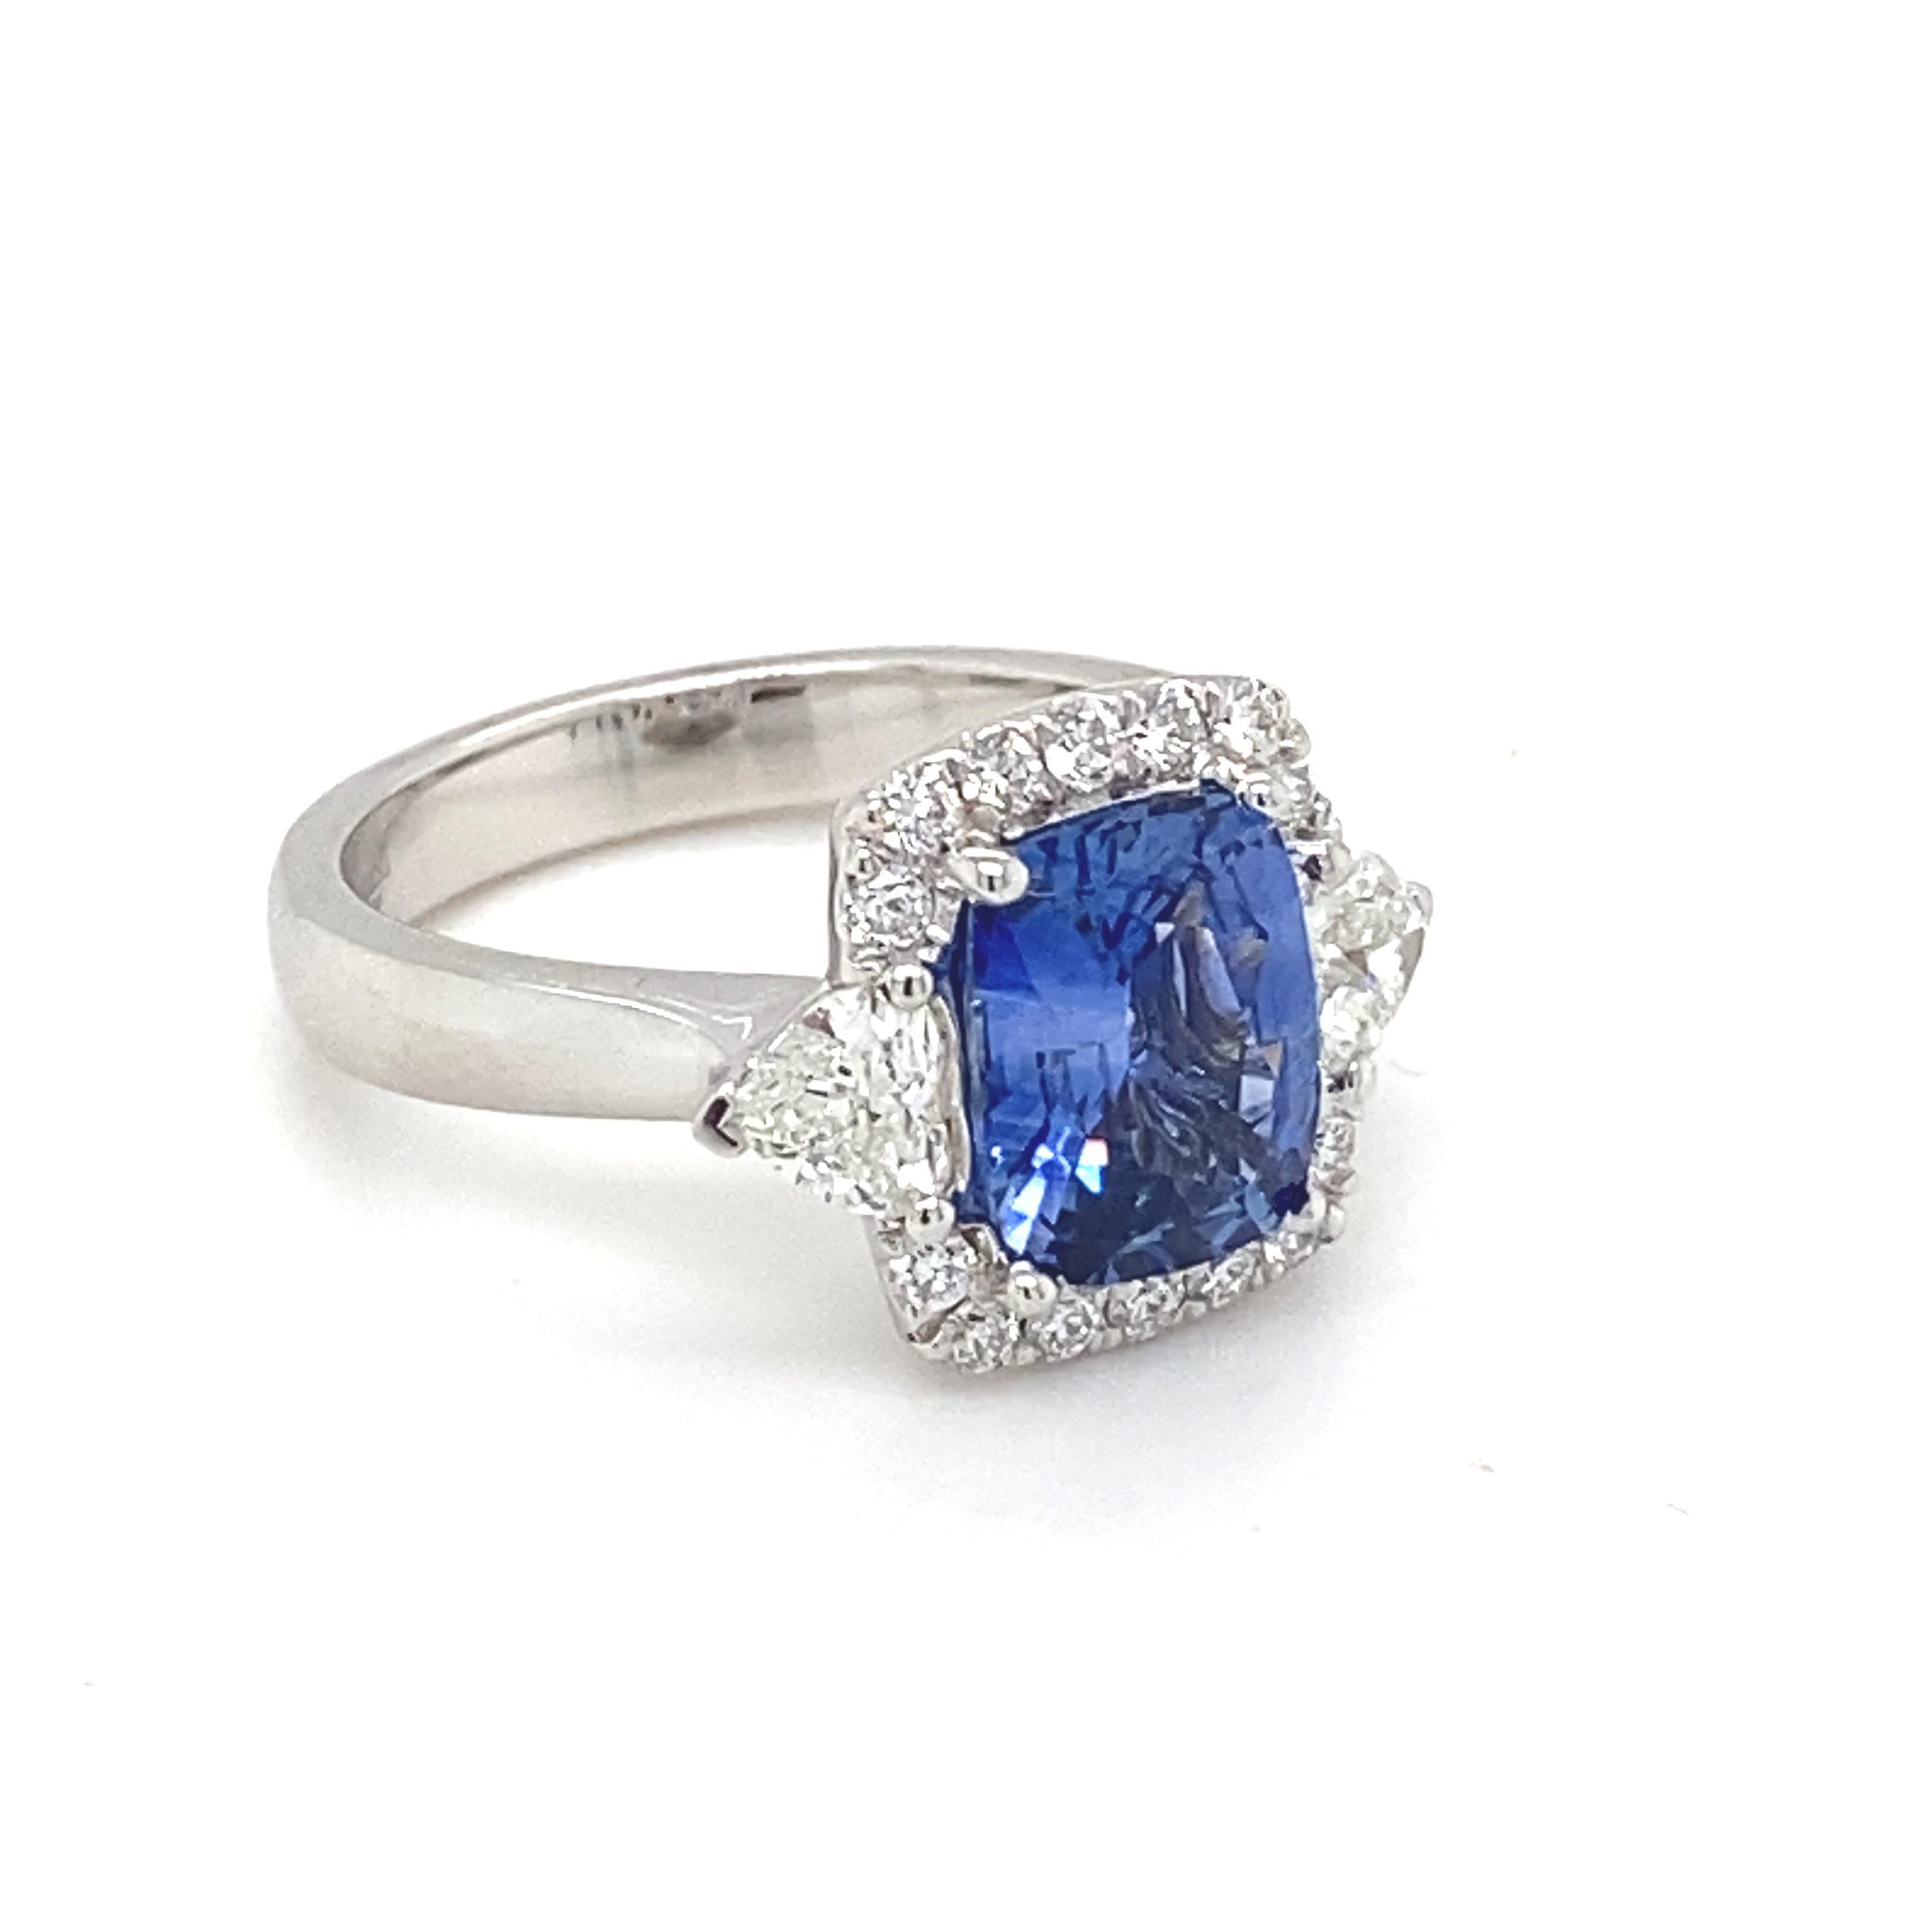 Cushion Cut GIA Certified 2.76 Carat Blue Sapphire Diamond White Gold Engagement Ring  For Sale